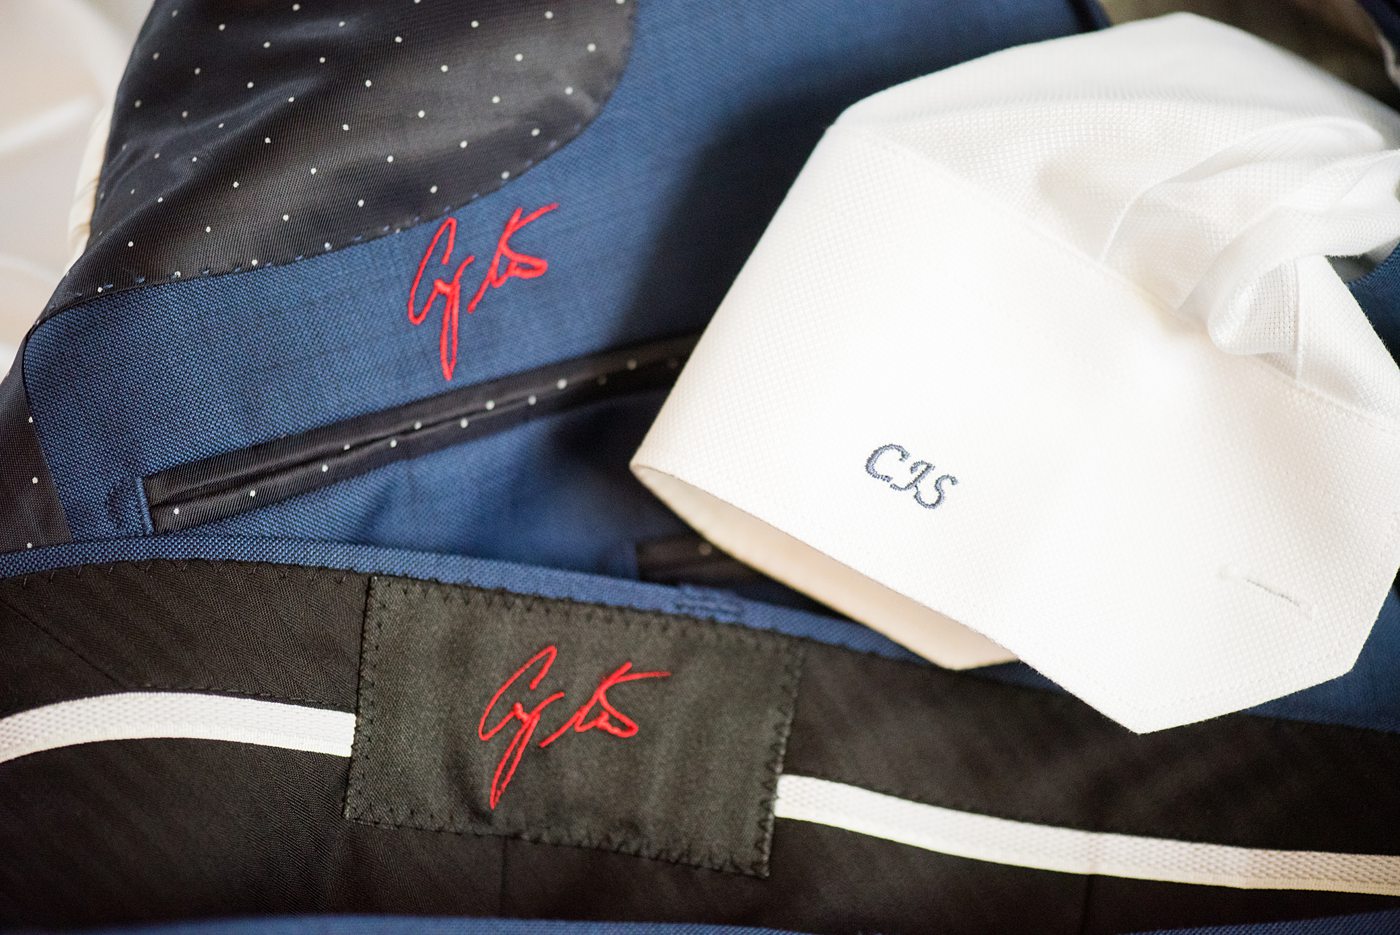 The groom wore a custom blue suit with his signature embroidered in red thread inside and custom initials on the cuffs for his wedding at Crabtree's Kittle House in Chappaqua, New York. Photos by Mikkel Paige Photography. This venue in Westchester County is near the Hudson Valley and NYC. #mikkelpaige #hudsonvalleyweddings #crabtreeskittlehouse #fallwedding #westchestervenues #groom #weddingday #groomstyle #customsuit